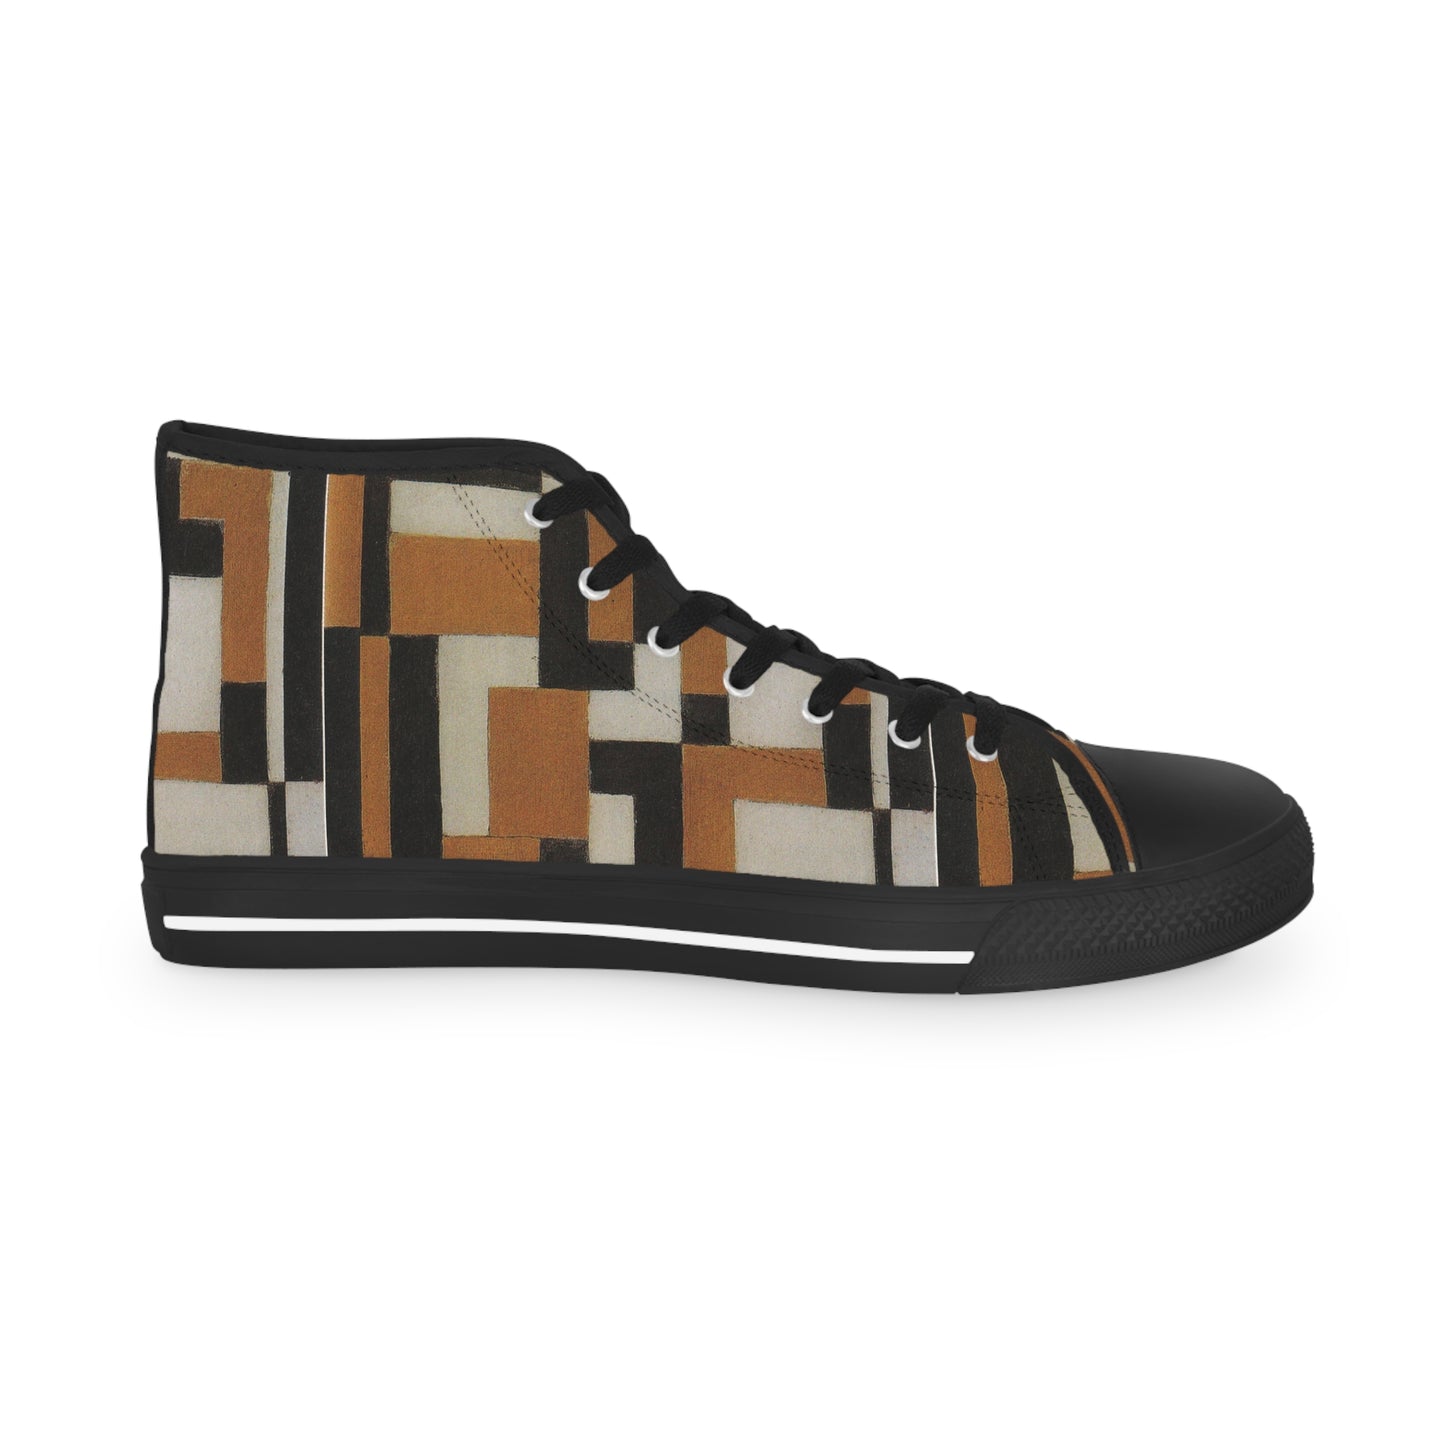 THEO VAN DOESBURG - COMPOSITION - HIGH TOP SNEAKERS FOR HIM 